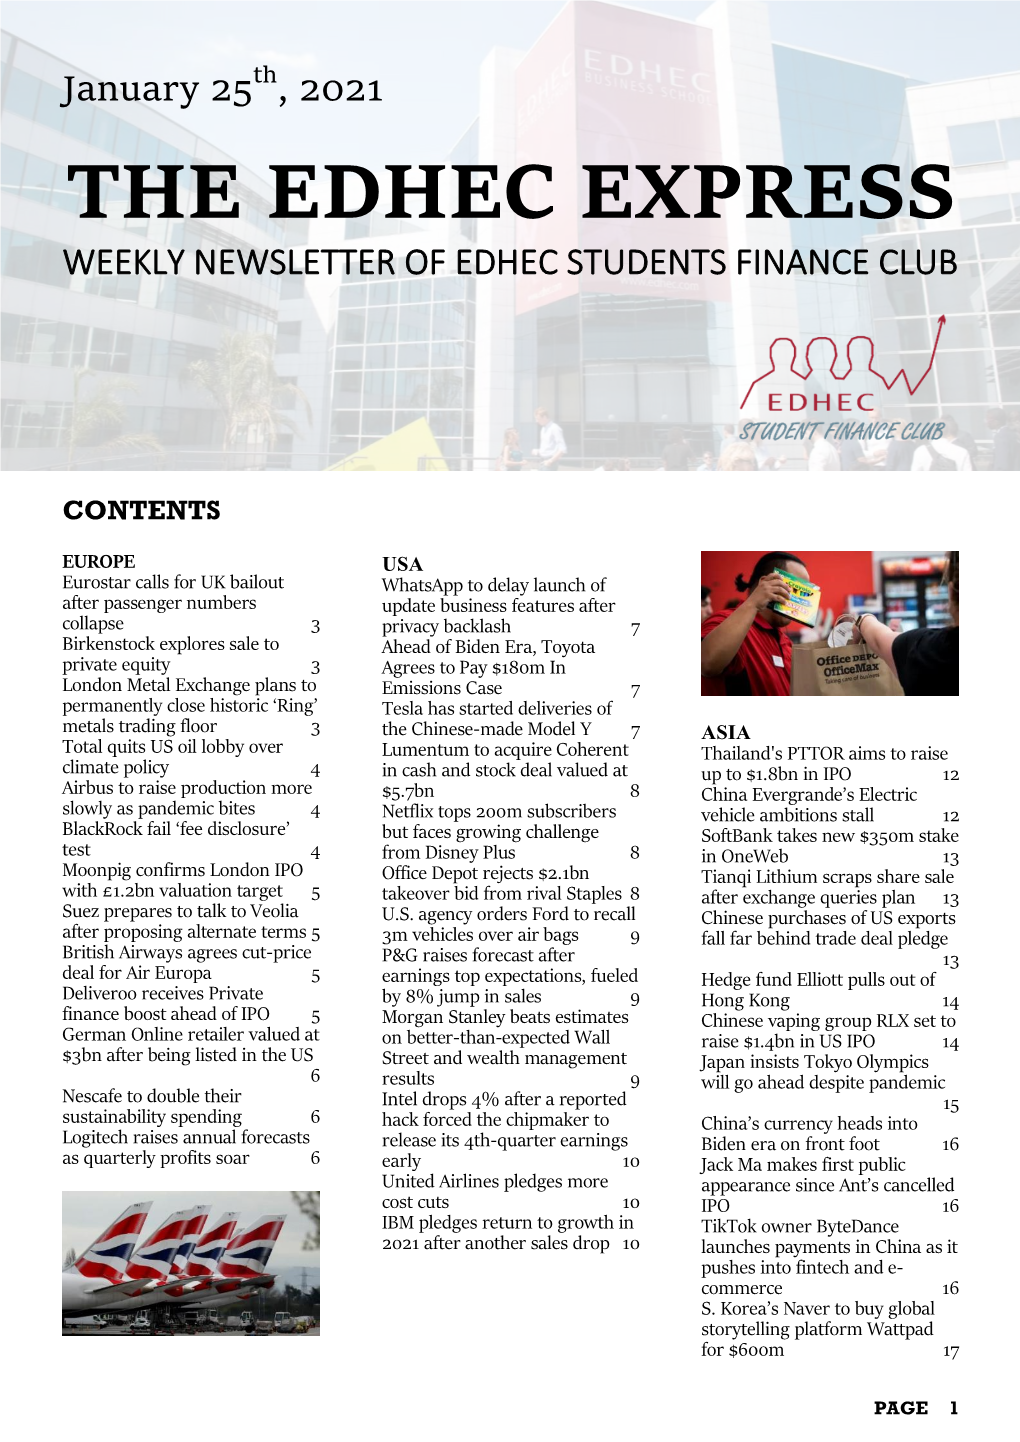 The Edhec Express Weekly Newsletter of Edhec Students Finance Club